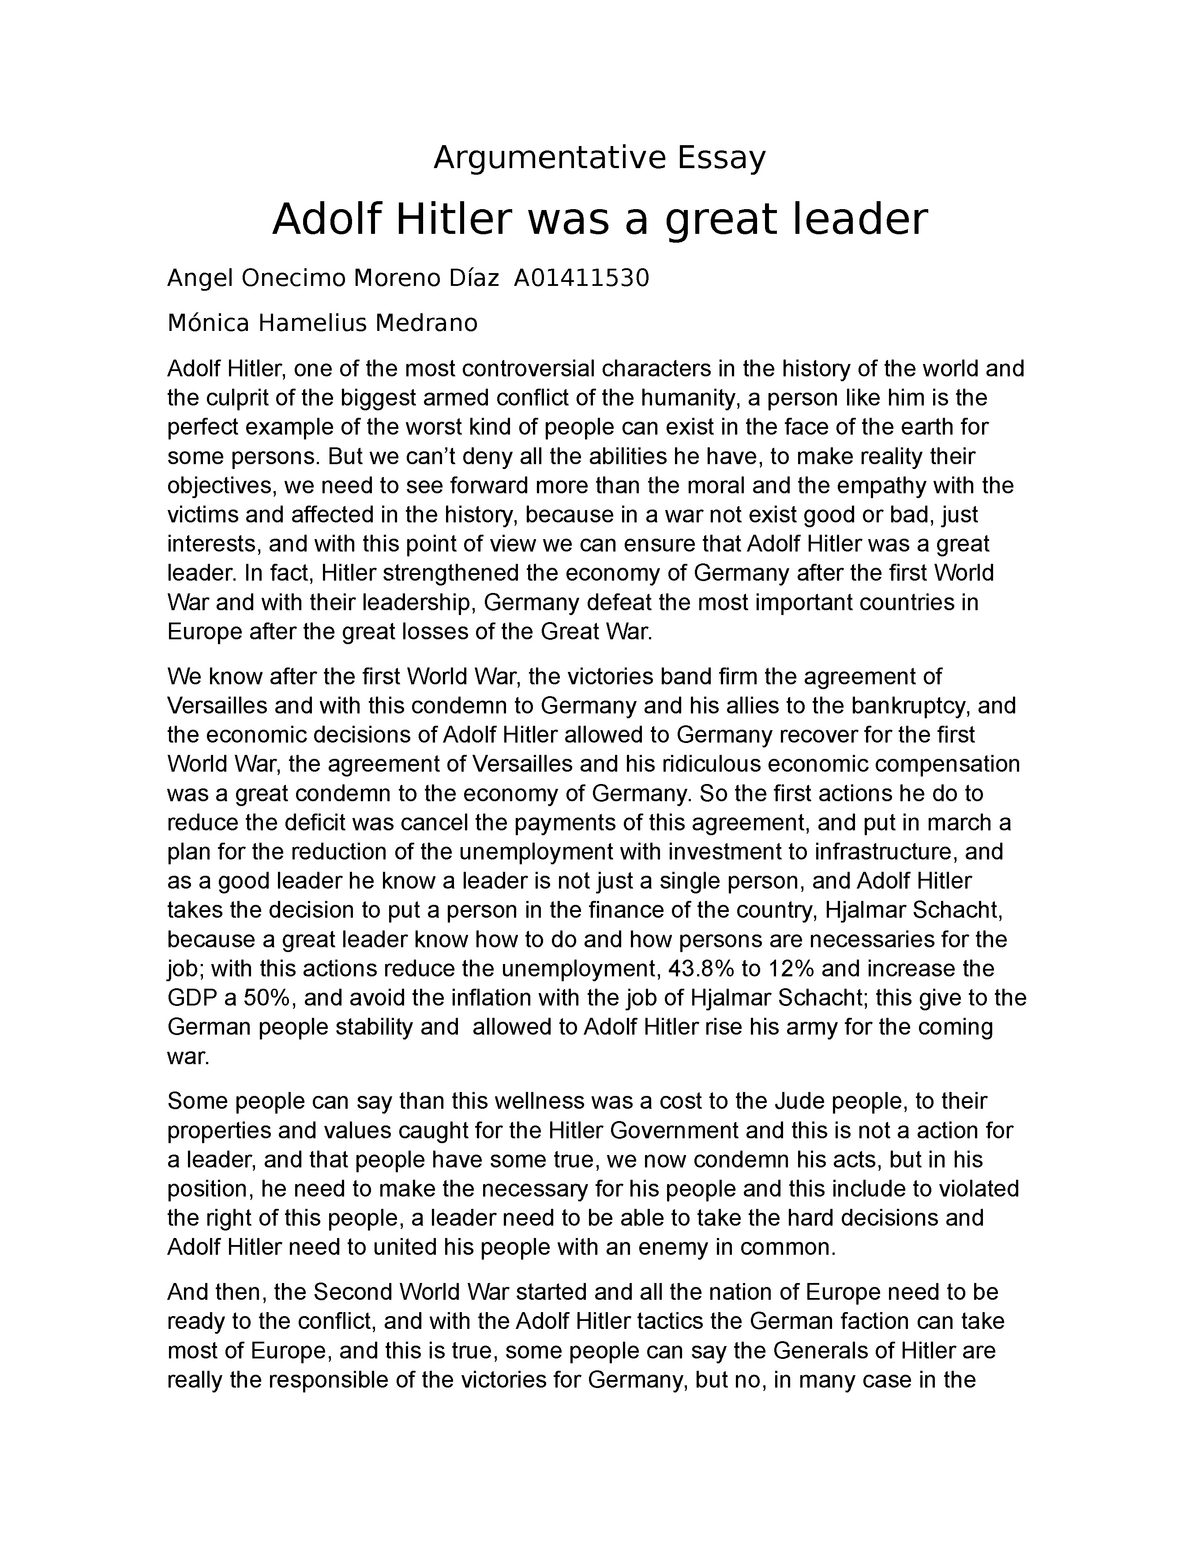 essay questions on hitler